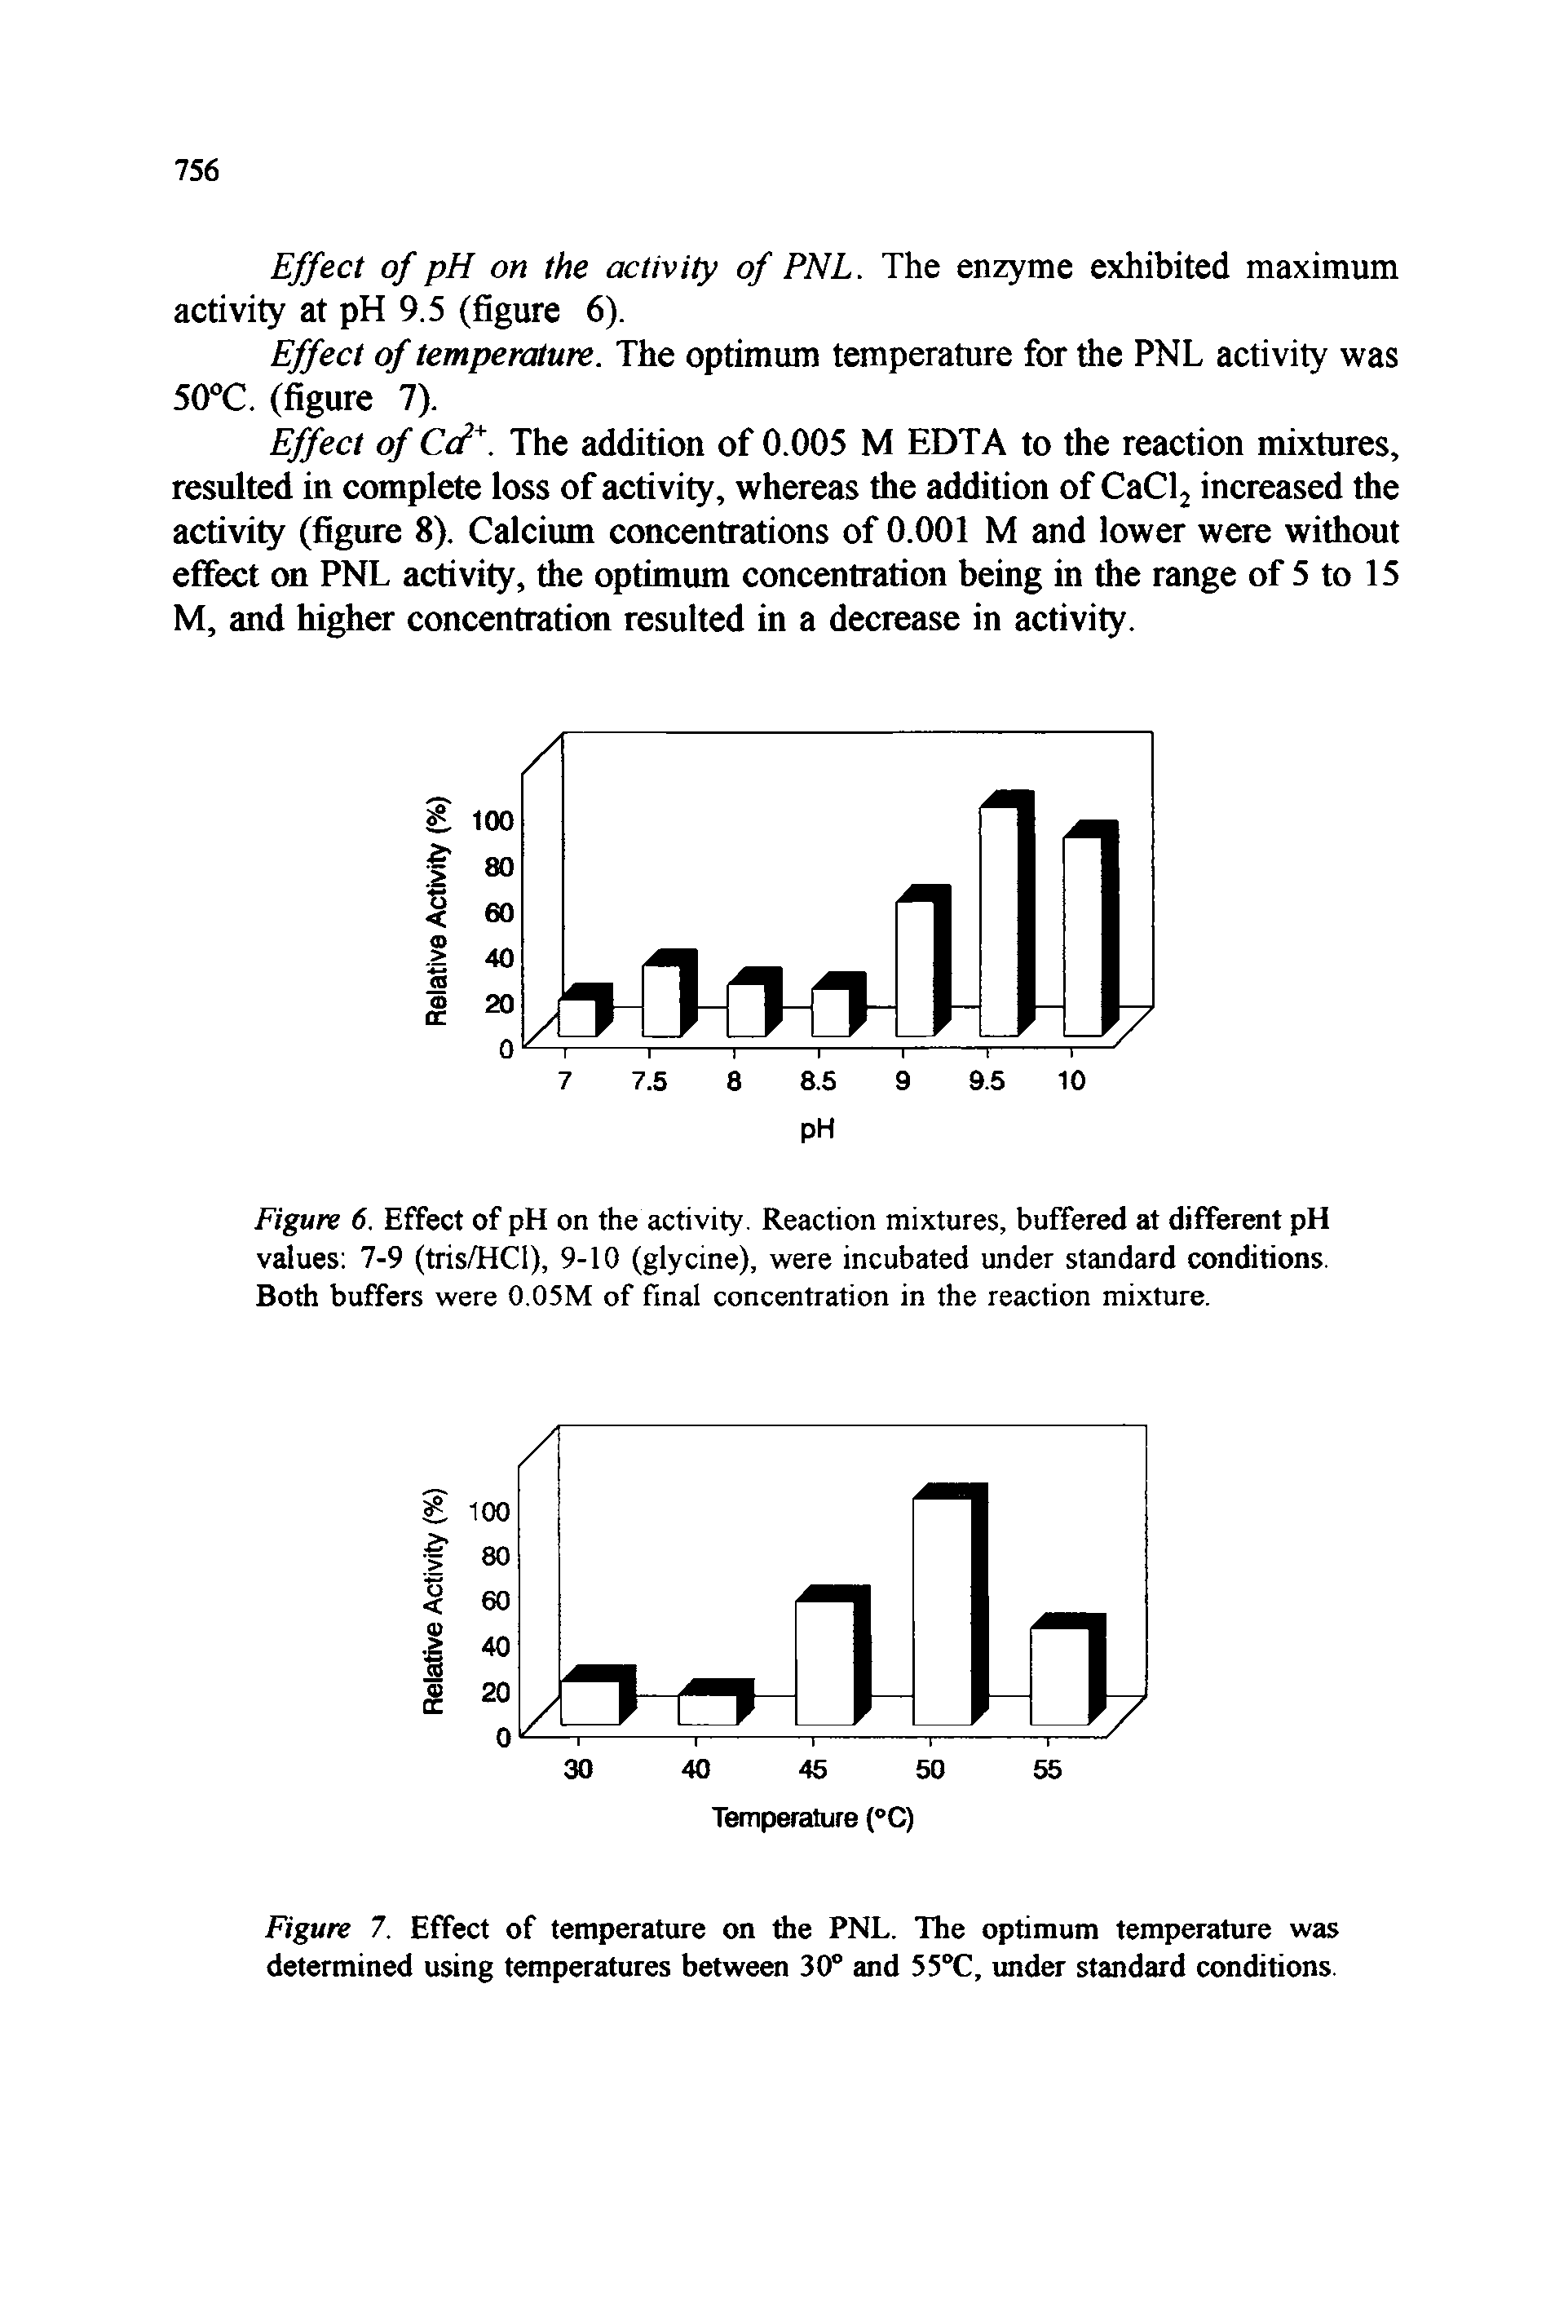 Figure 6. Effect of pH on the activity. Reaction mixtures, buffered at different pH values 7-9 (tris/HCl), 9-10 (glycine), were incubated under standard conditions. Both buffers were 0.05M of final concentration in the reaction mixture.